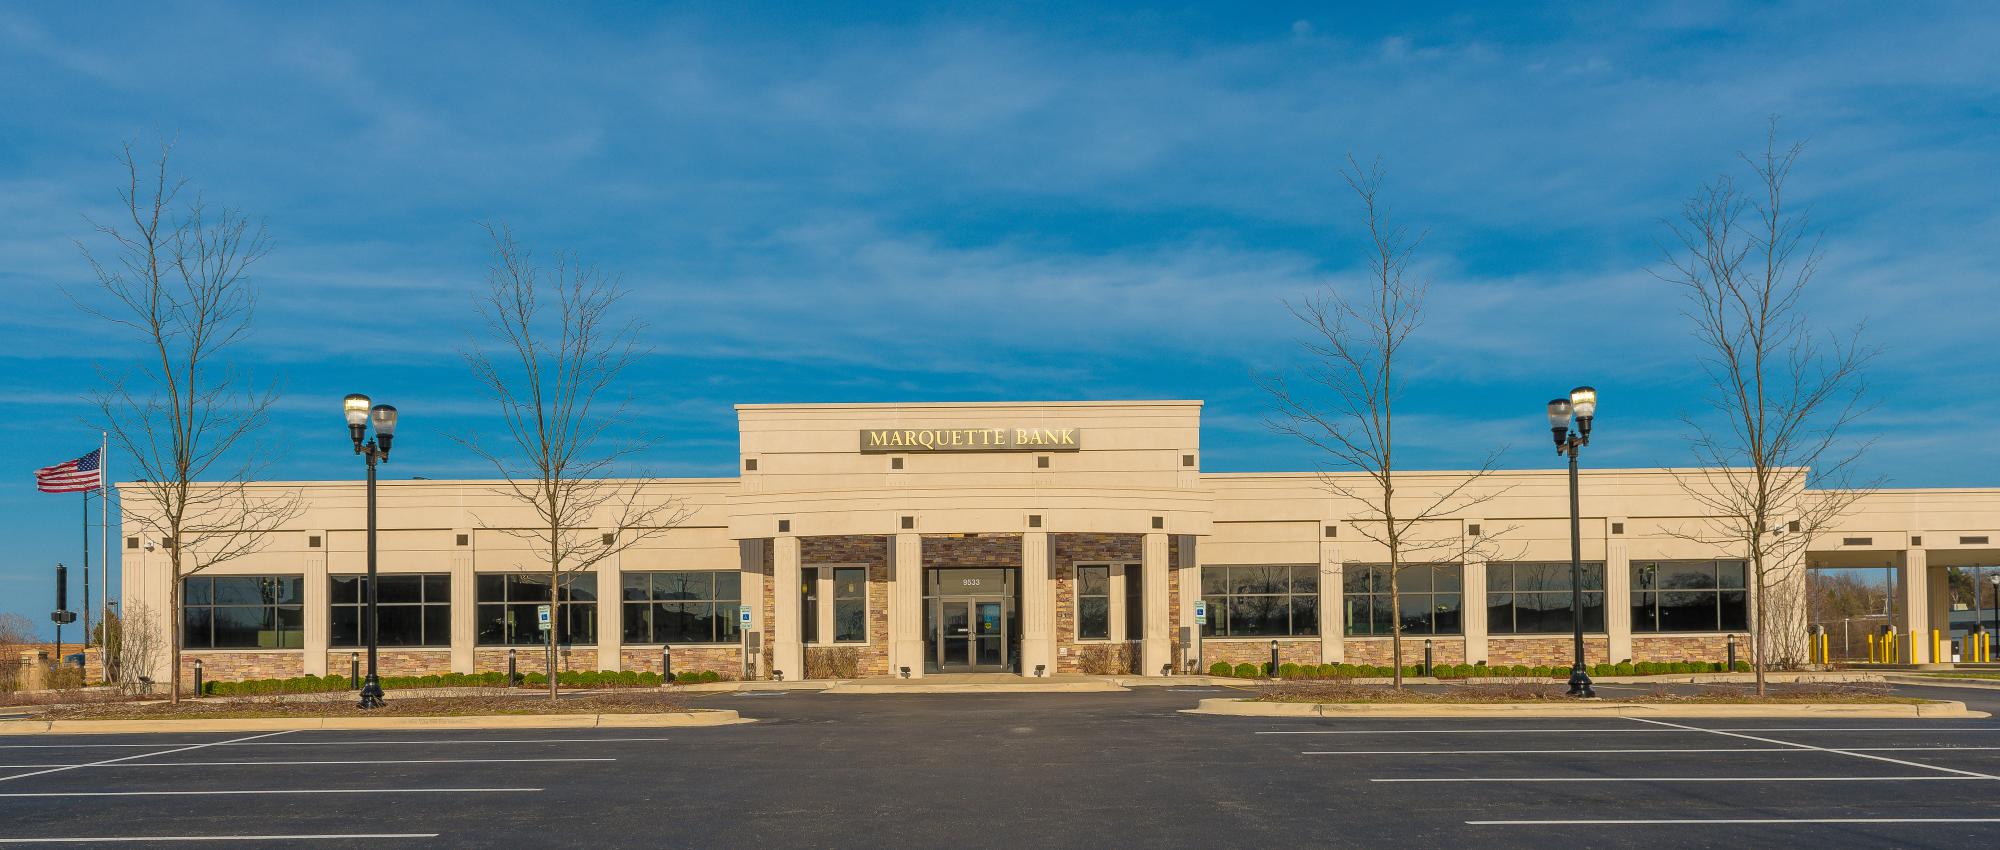 marquette bank orland park